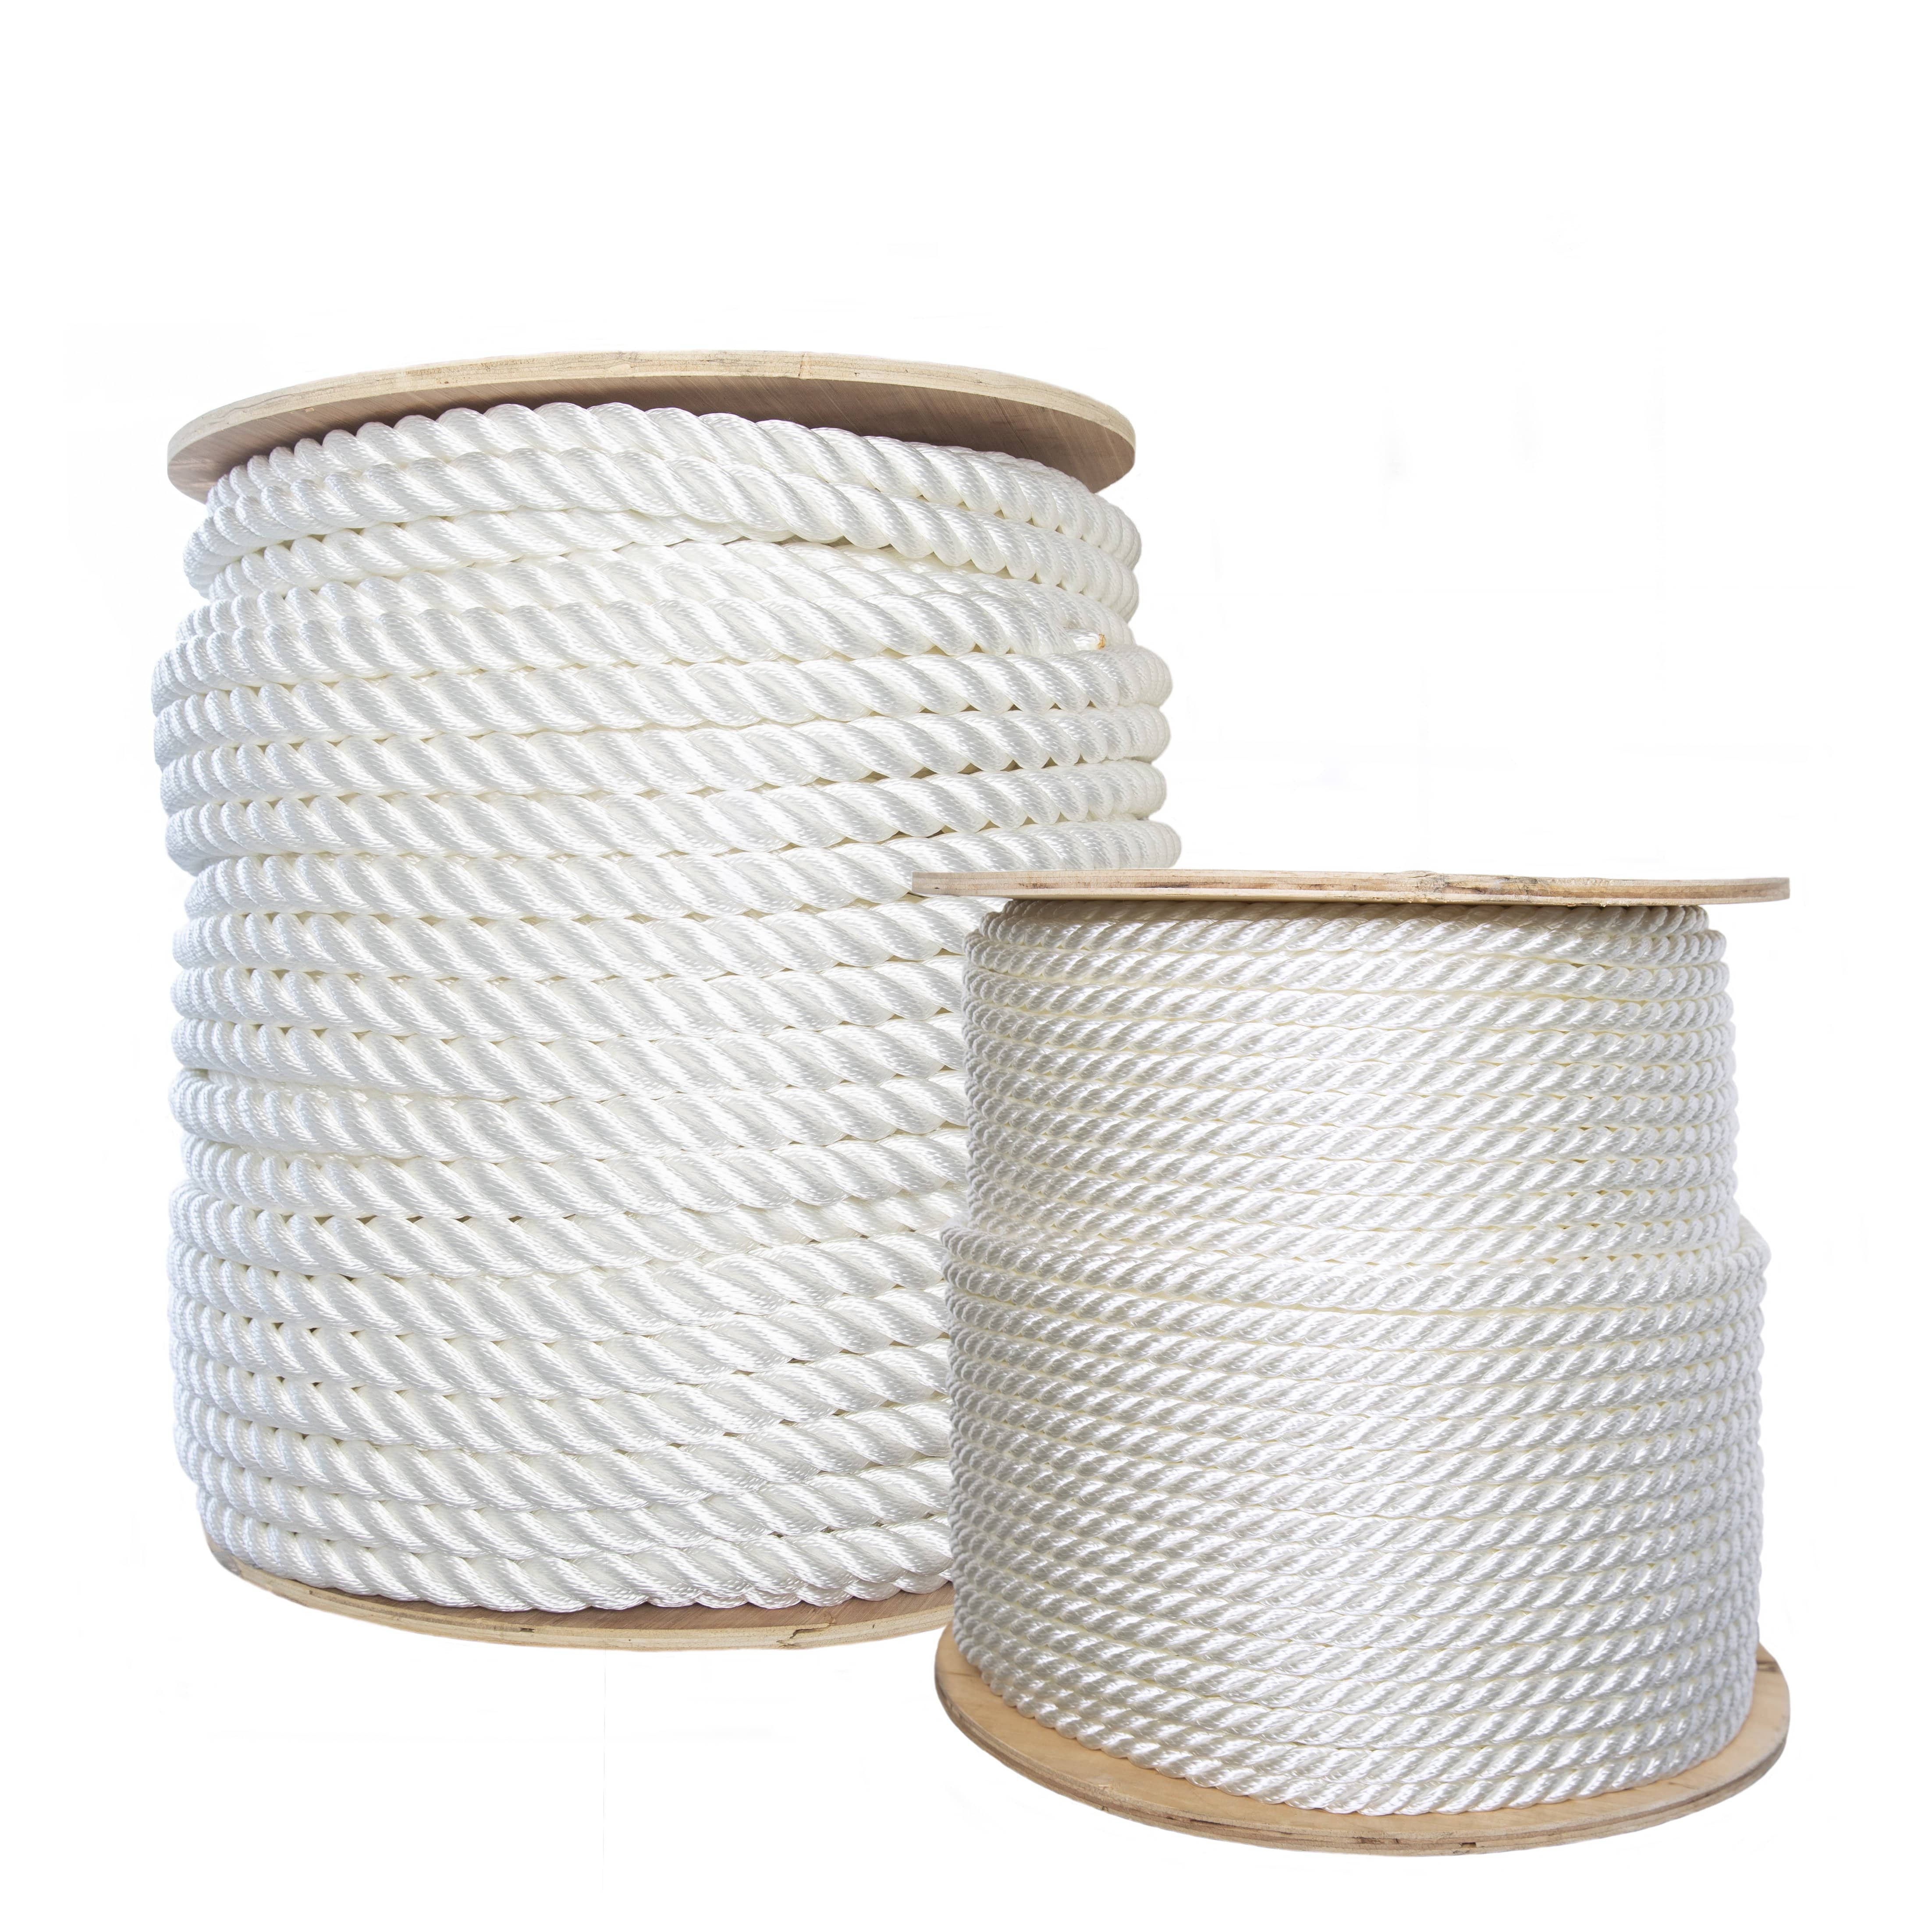 3/8 inch Poly Rope - Practice Sports